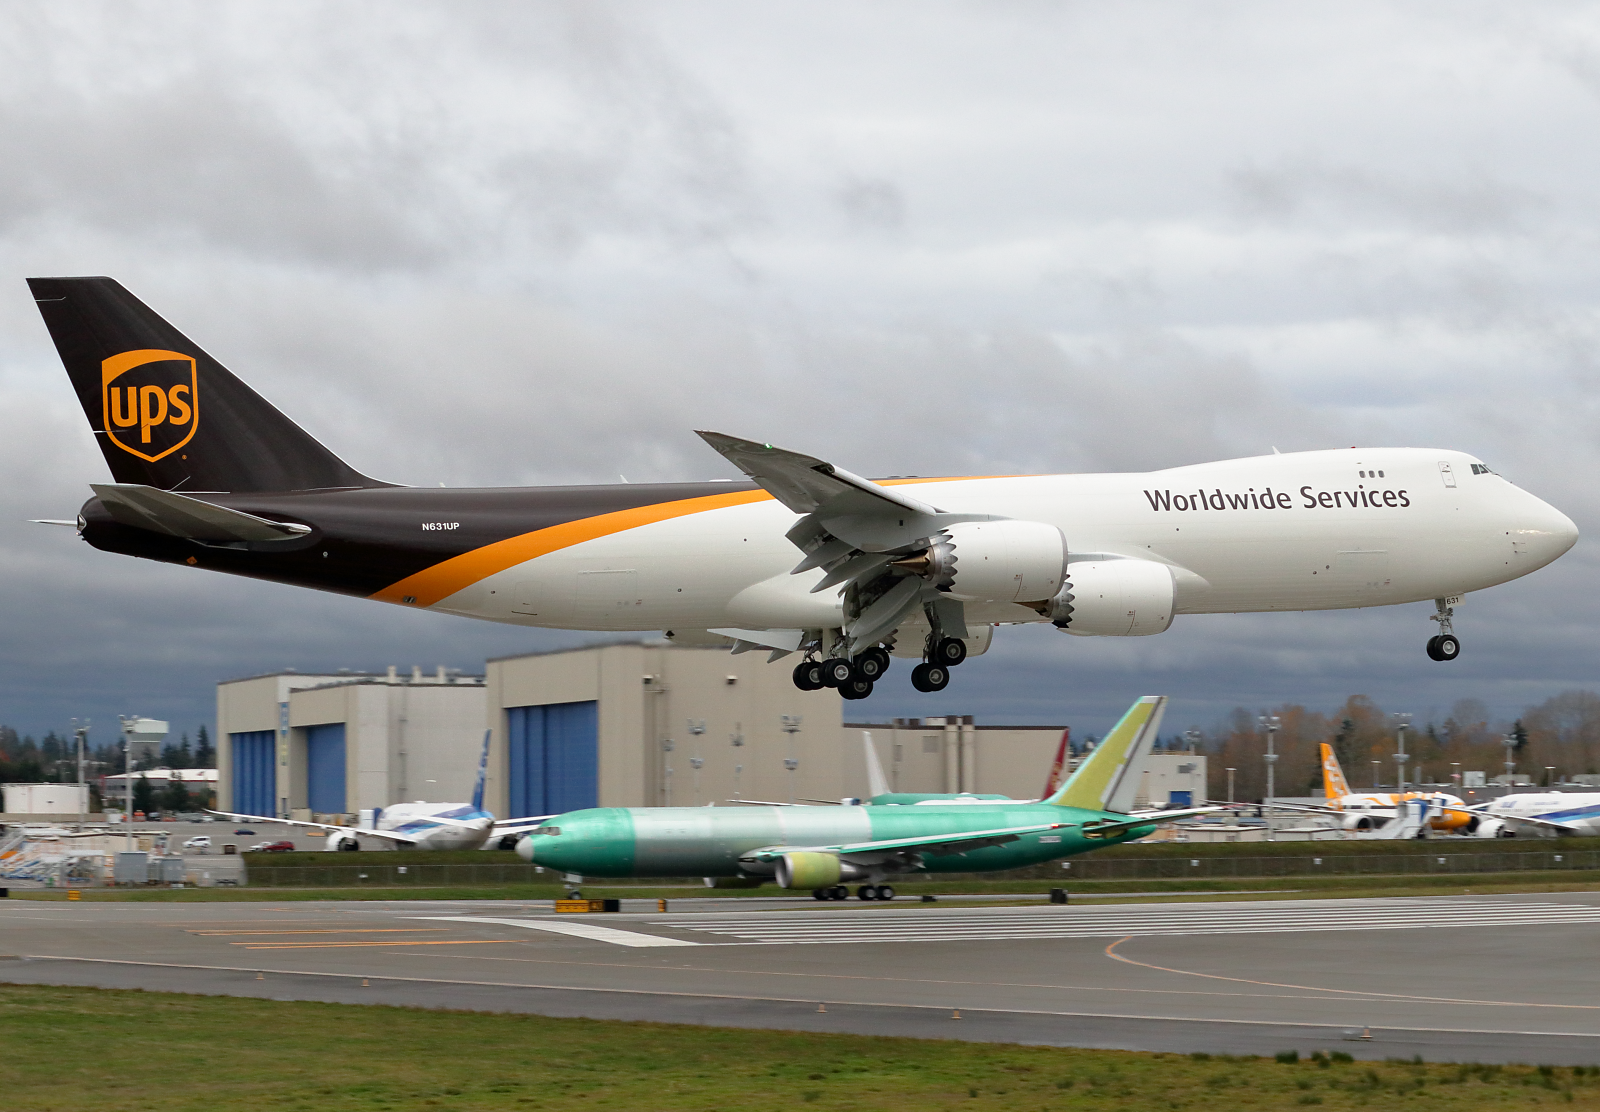 UPS 747-8F N631UP at KPAE Paine Field 